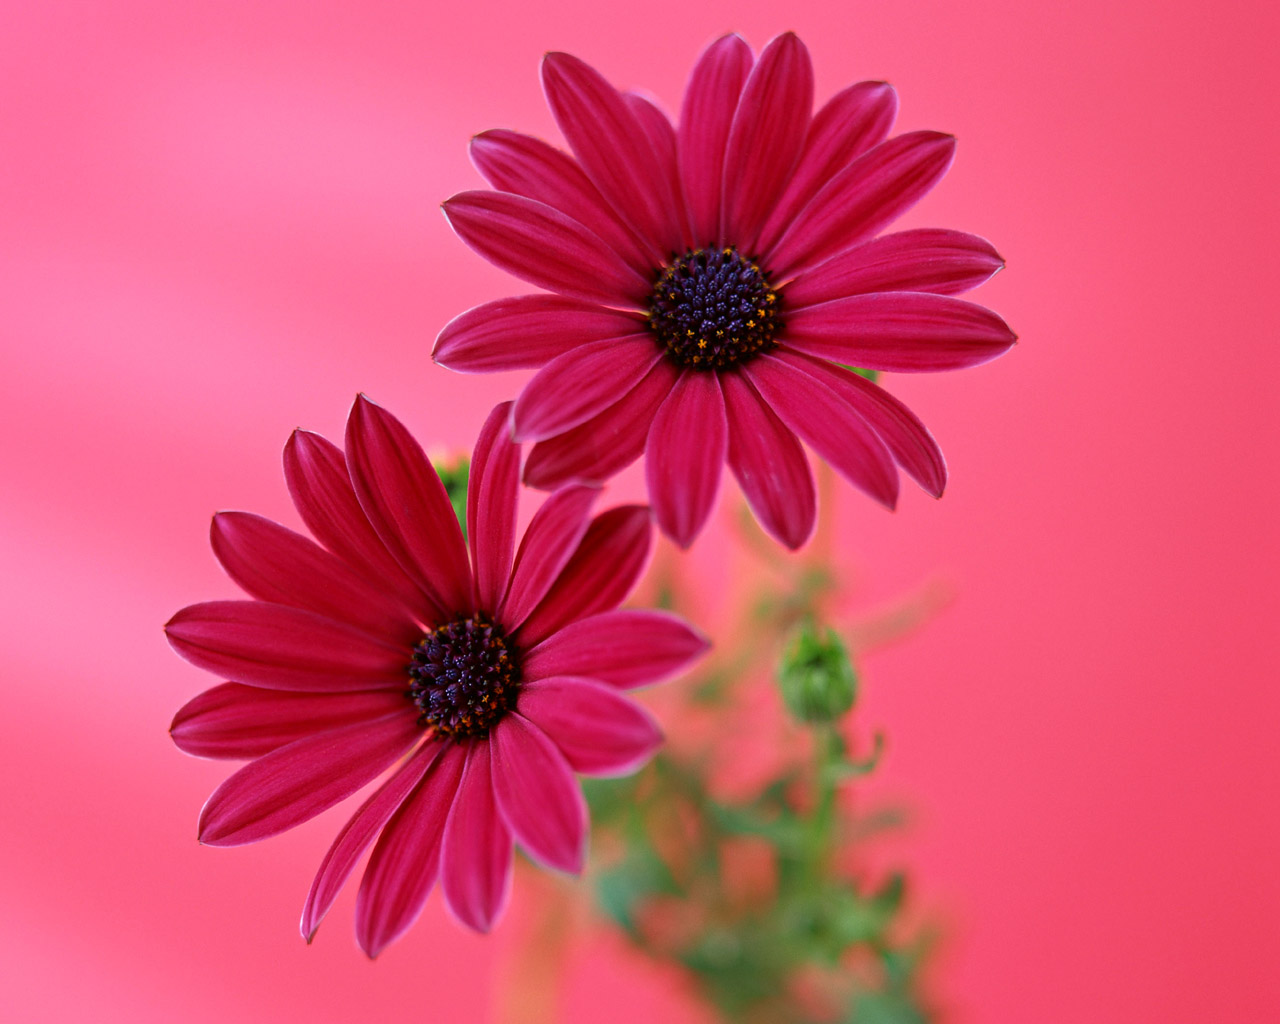 Colorful Gerber Daisy Wallpaper Images amp Pictures   Becuo 1280x1024